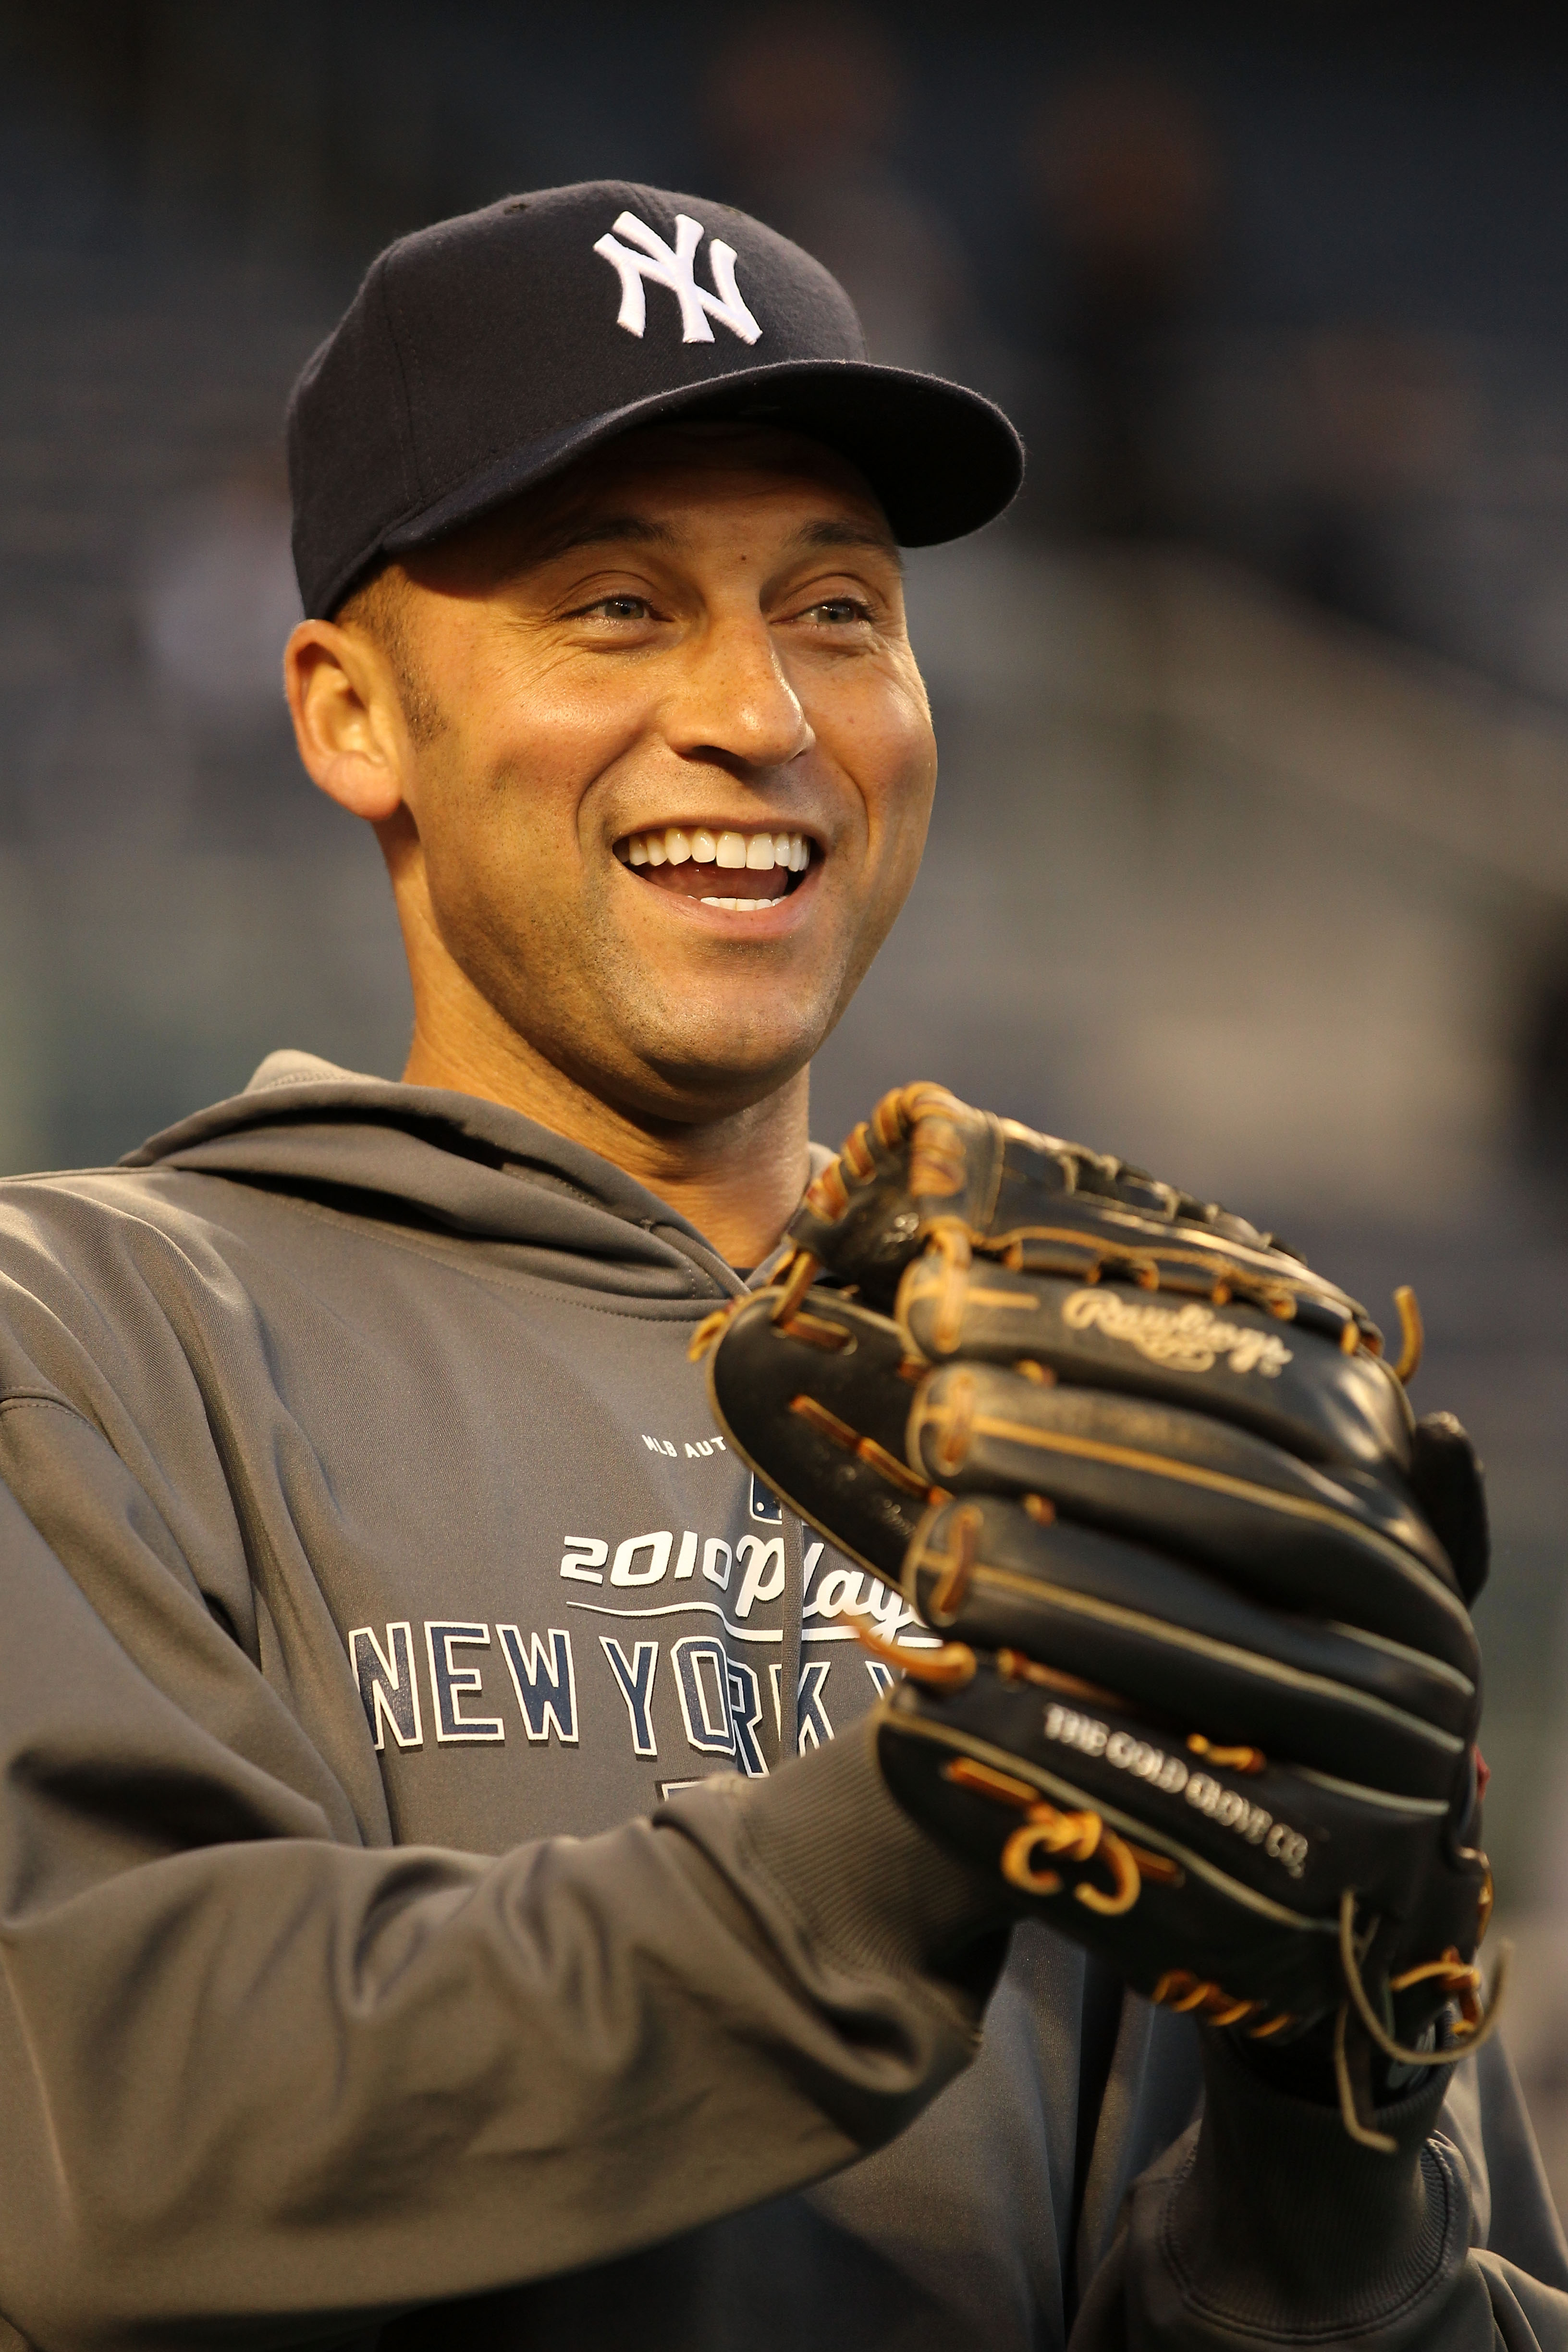 NEW YORK - OCTOBER 19:  Derek Jeter #2 of the New York Yankees smiles during batting practice against the Texas Rangers in Game Four of the ALCS during the 2010 MLB Playoffs at Yankee Stadium on October 19, 2010 in the Bronx borough of New York City.  (Ph